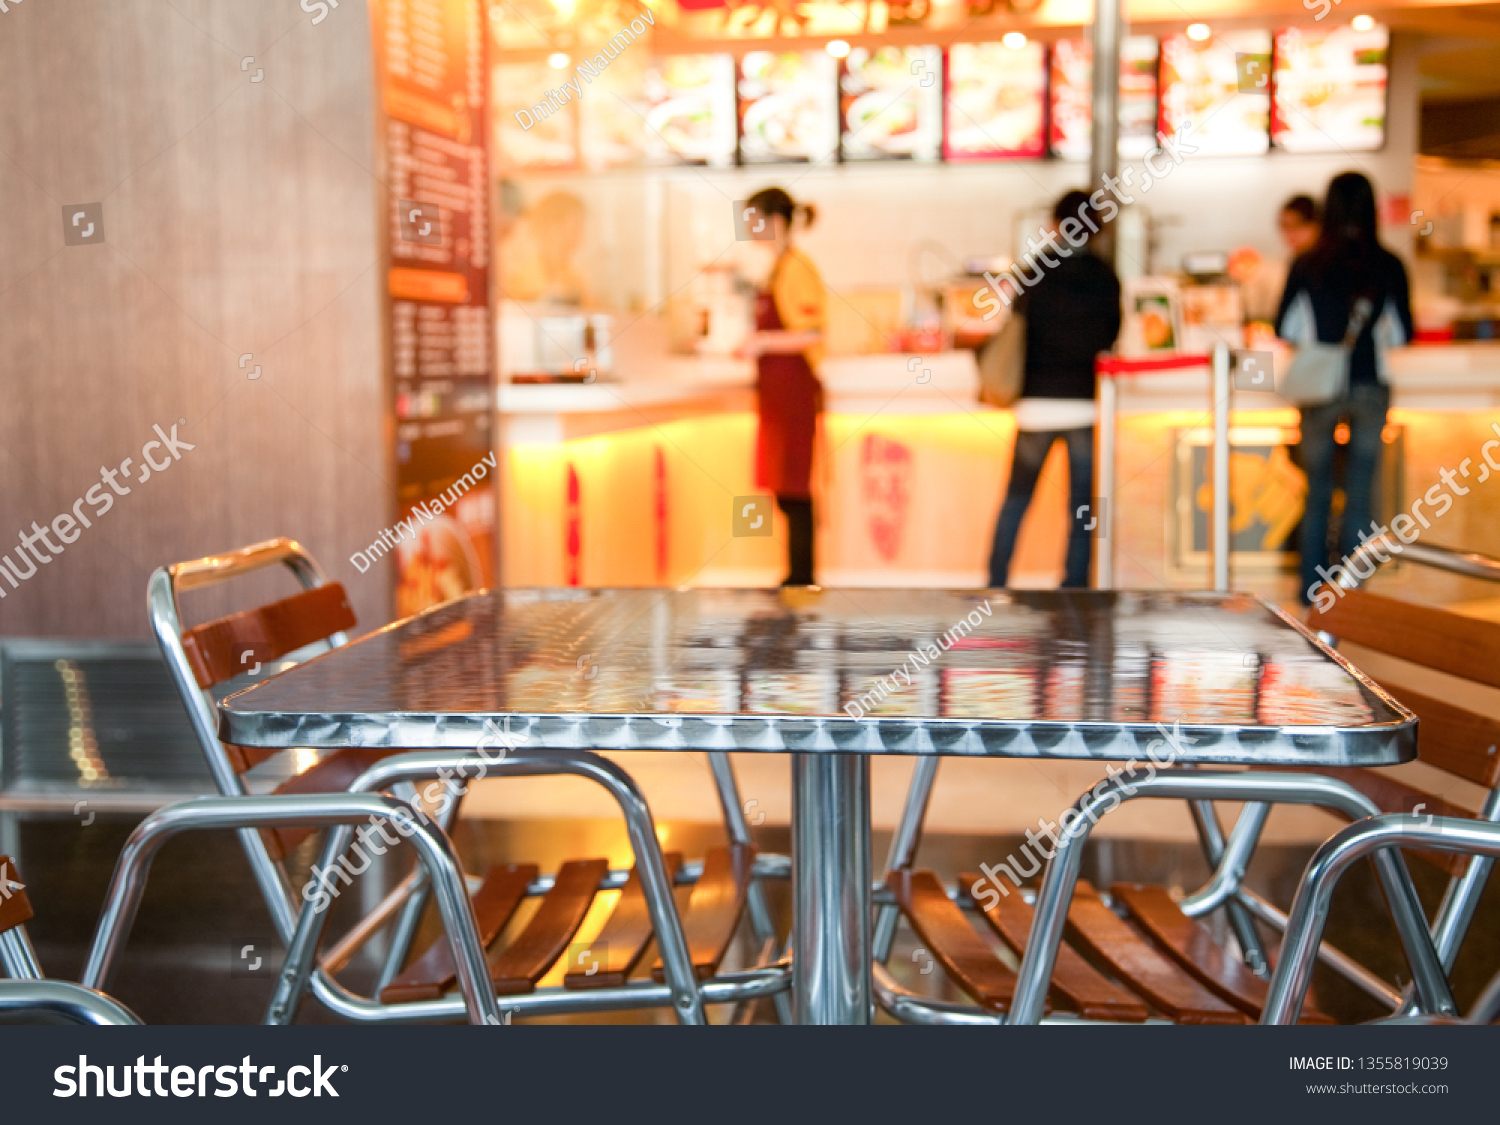 Metal table and chairs at Chinese fastfood cafe in foodcourt with blurred counter menu and tray, focus on furniture - public catering background #1355819039